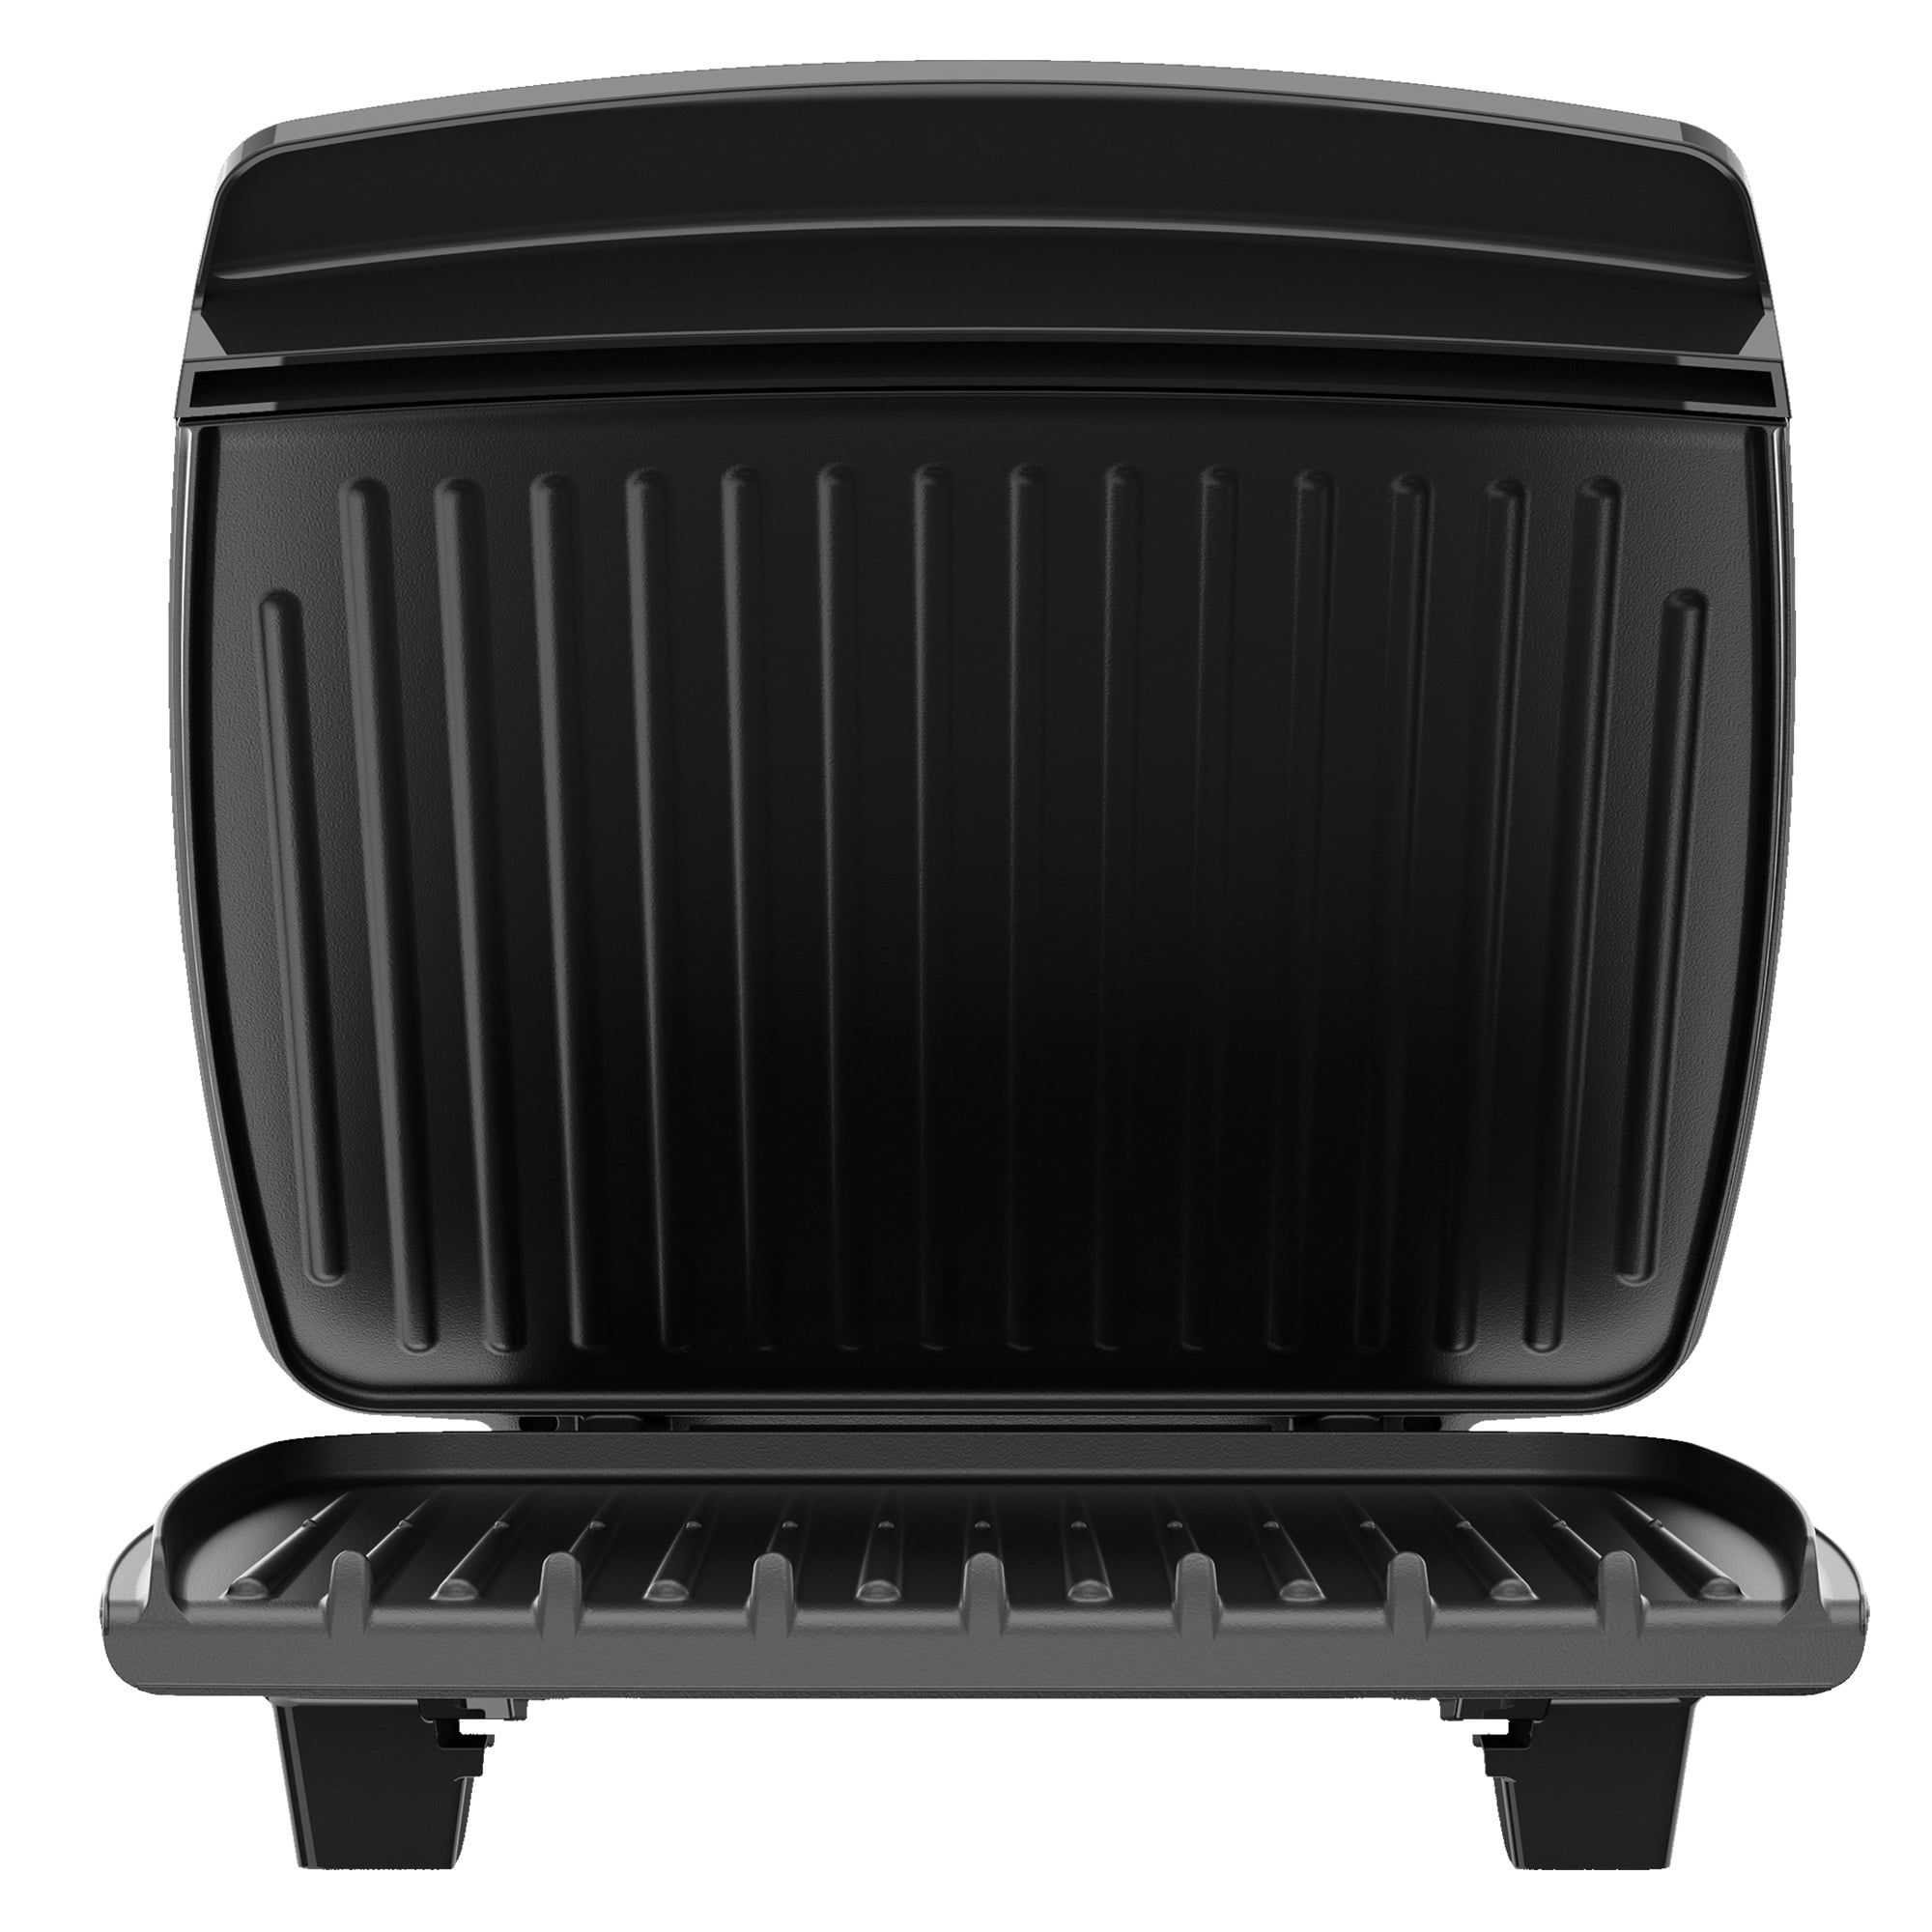 George Foreman Beyond Grill 8-In-1 Electric Indoor Grill With Air Fry  Technology – MCAFD900D 1 ct